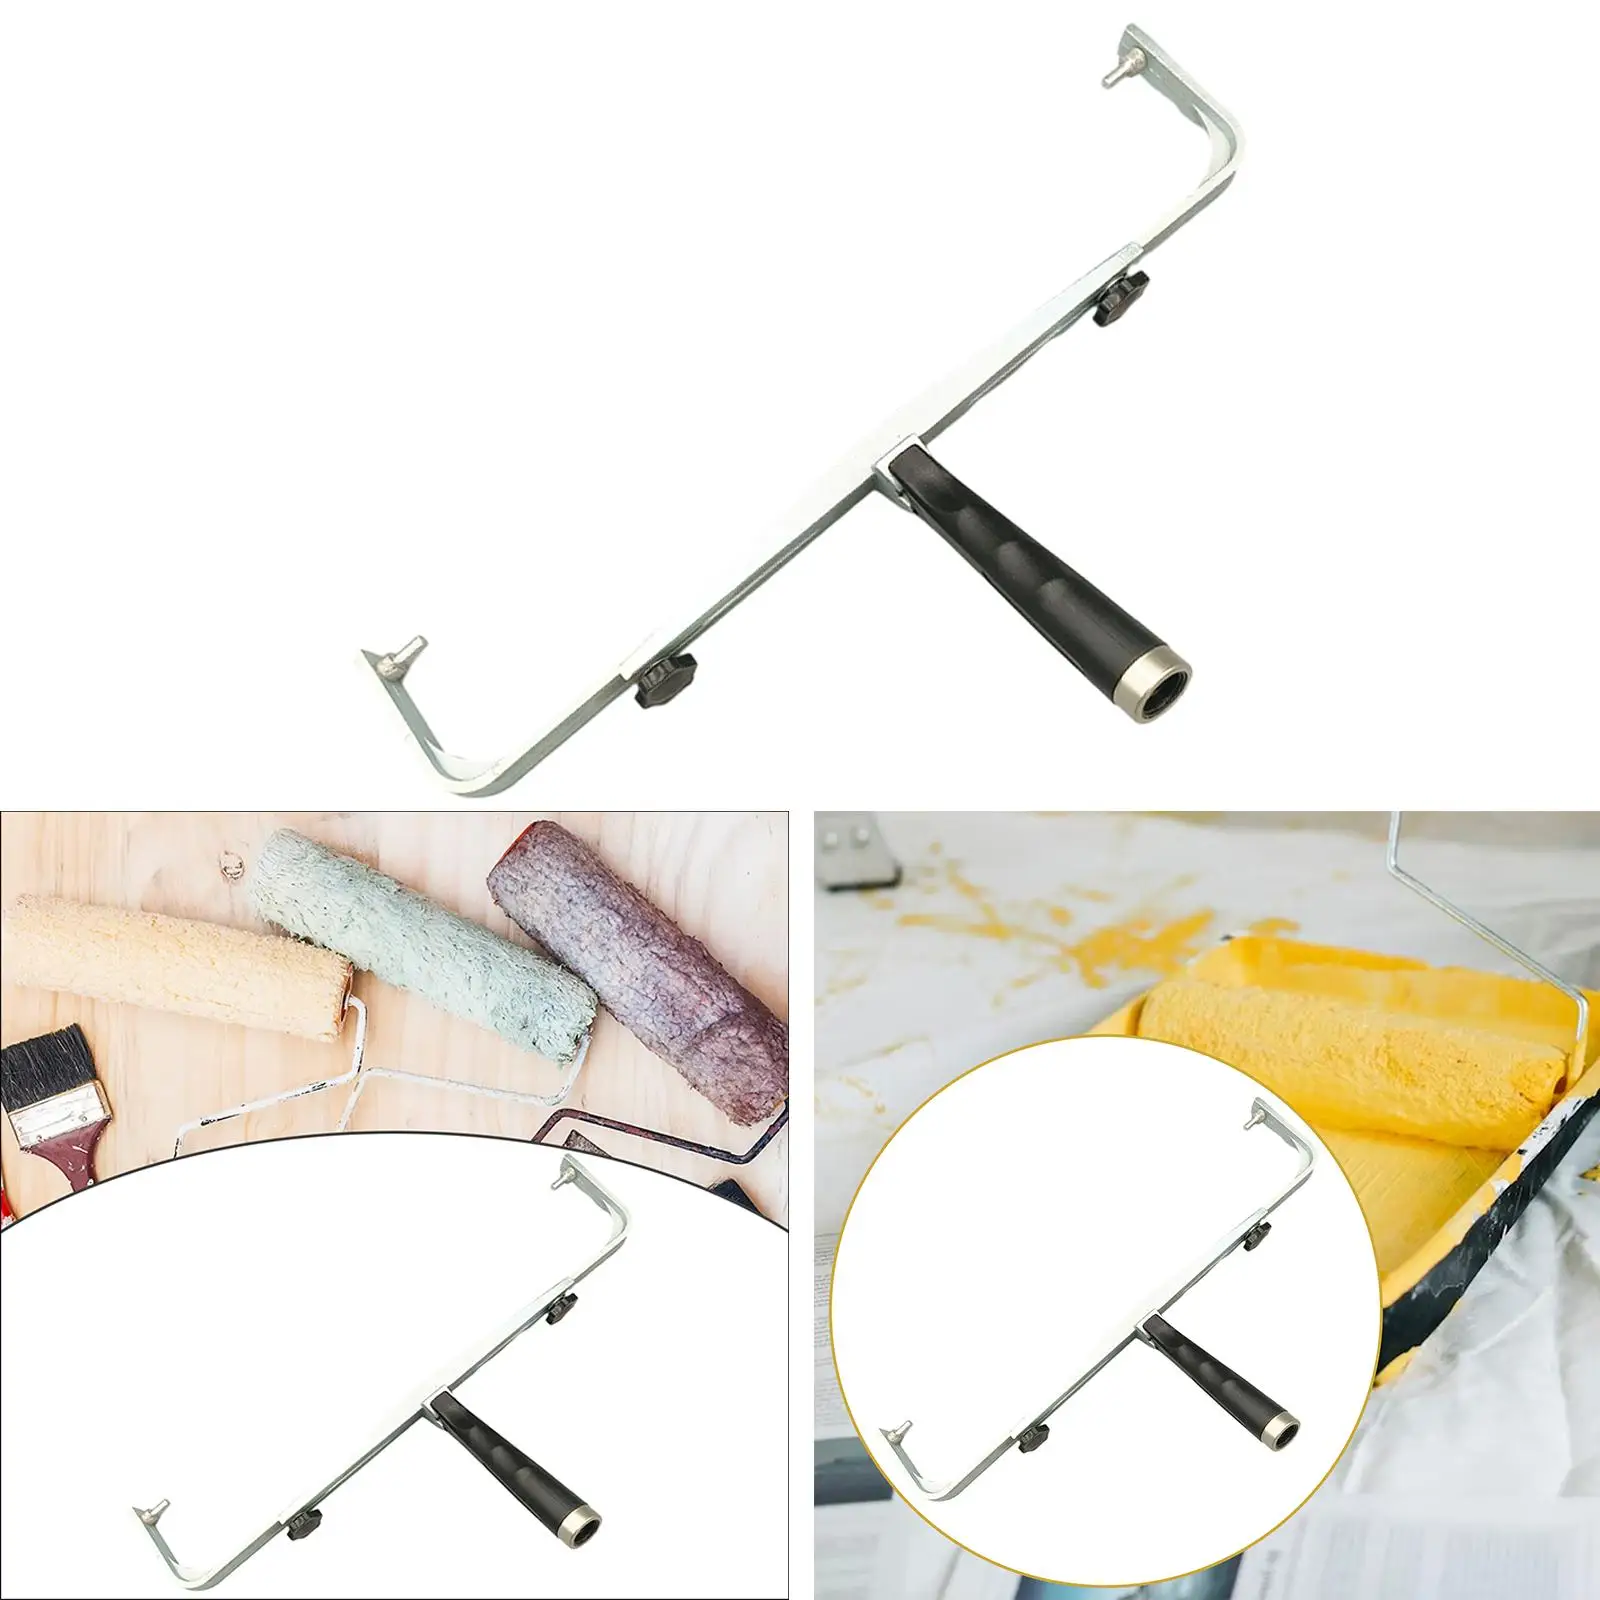 45cm Paint Roller Frame Replacements Durable Accessories Adjustable Heavy Duty for Painting Walls Professional Versatile